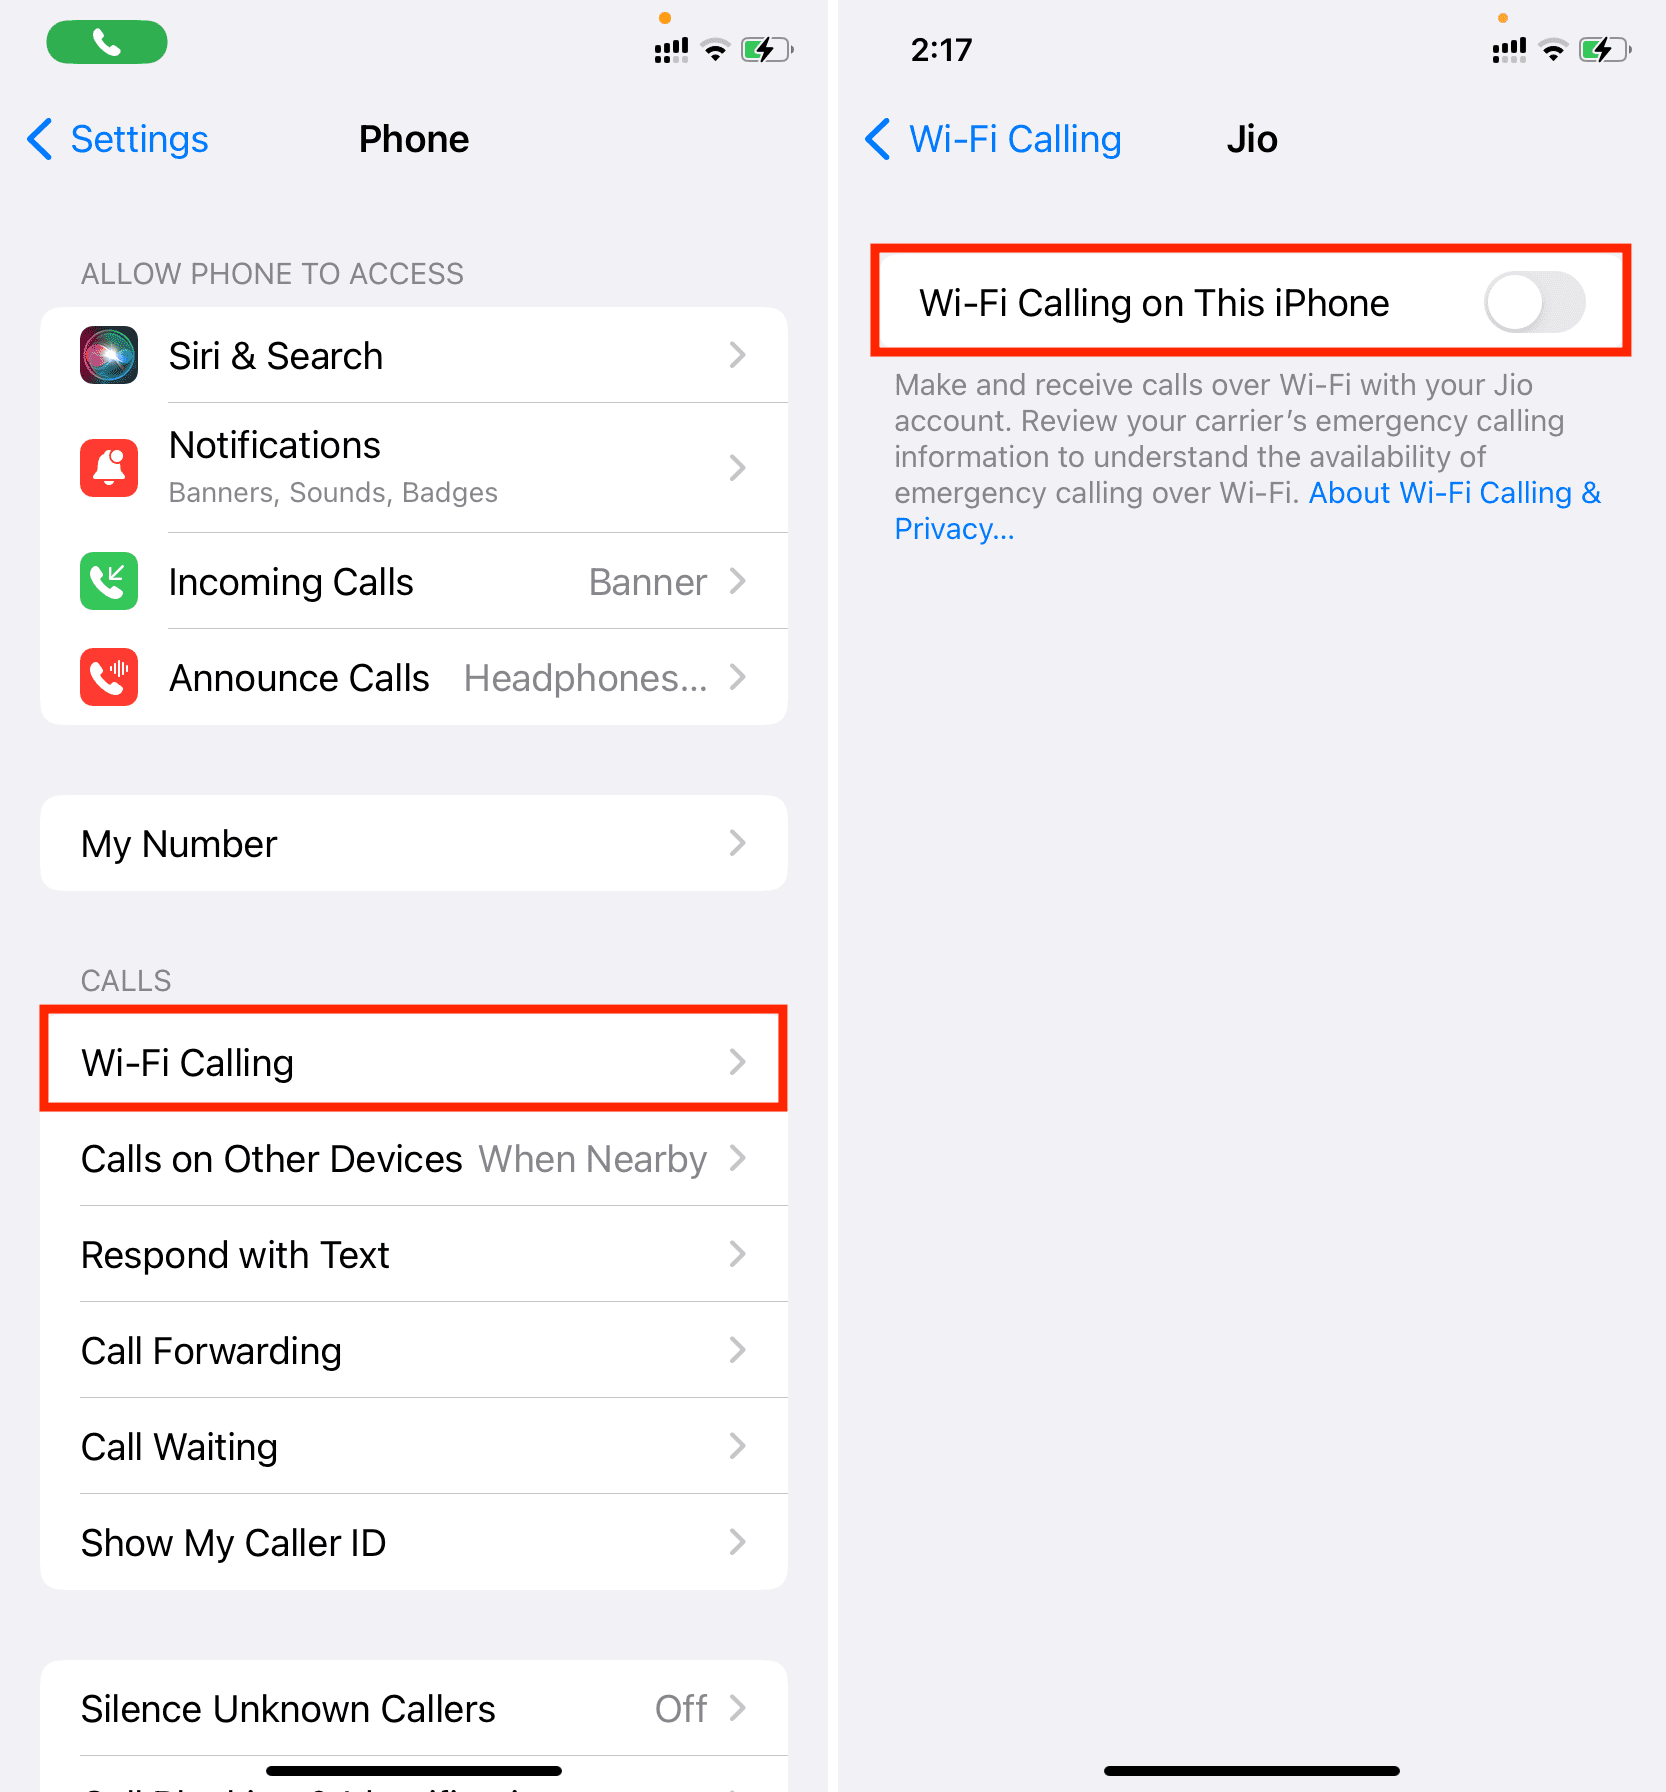 Turn off Wi-Fi Calling on iPhone and it will end call